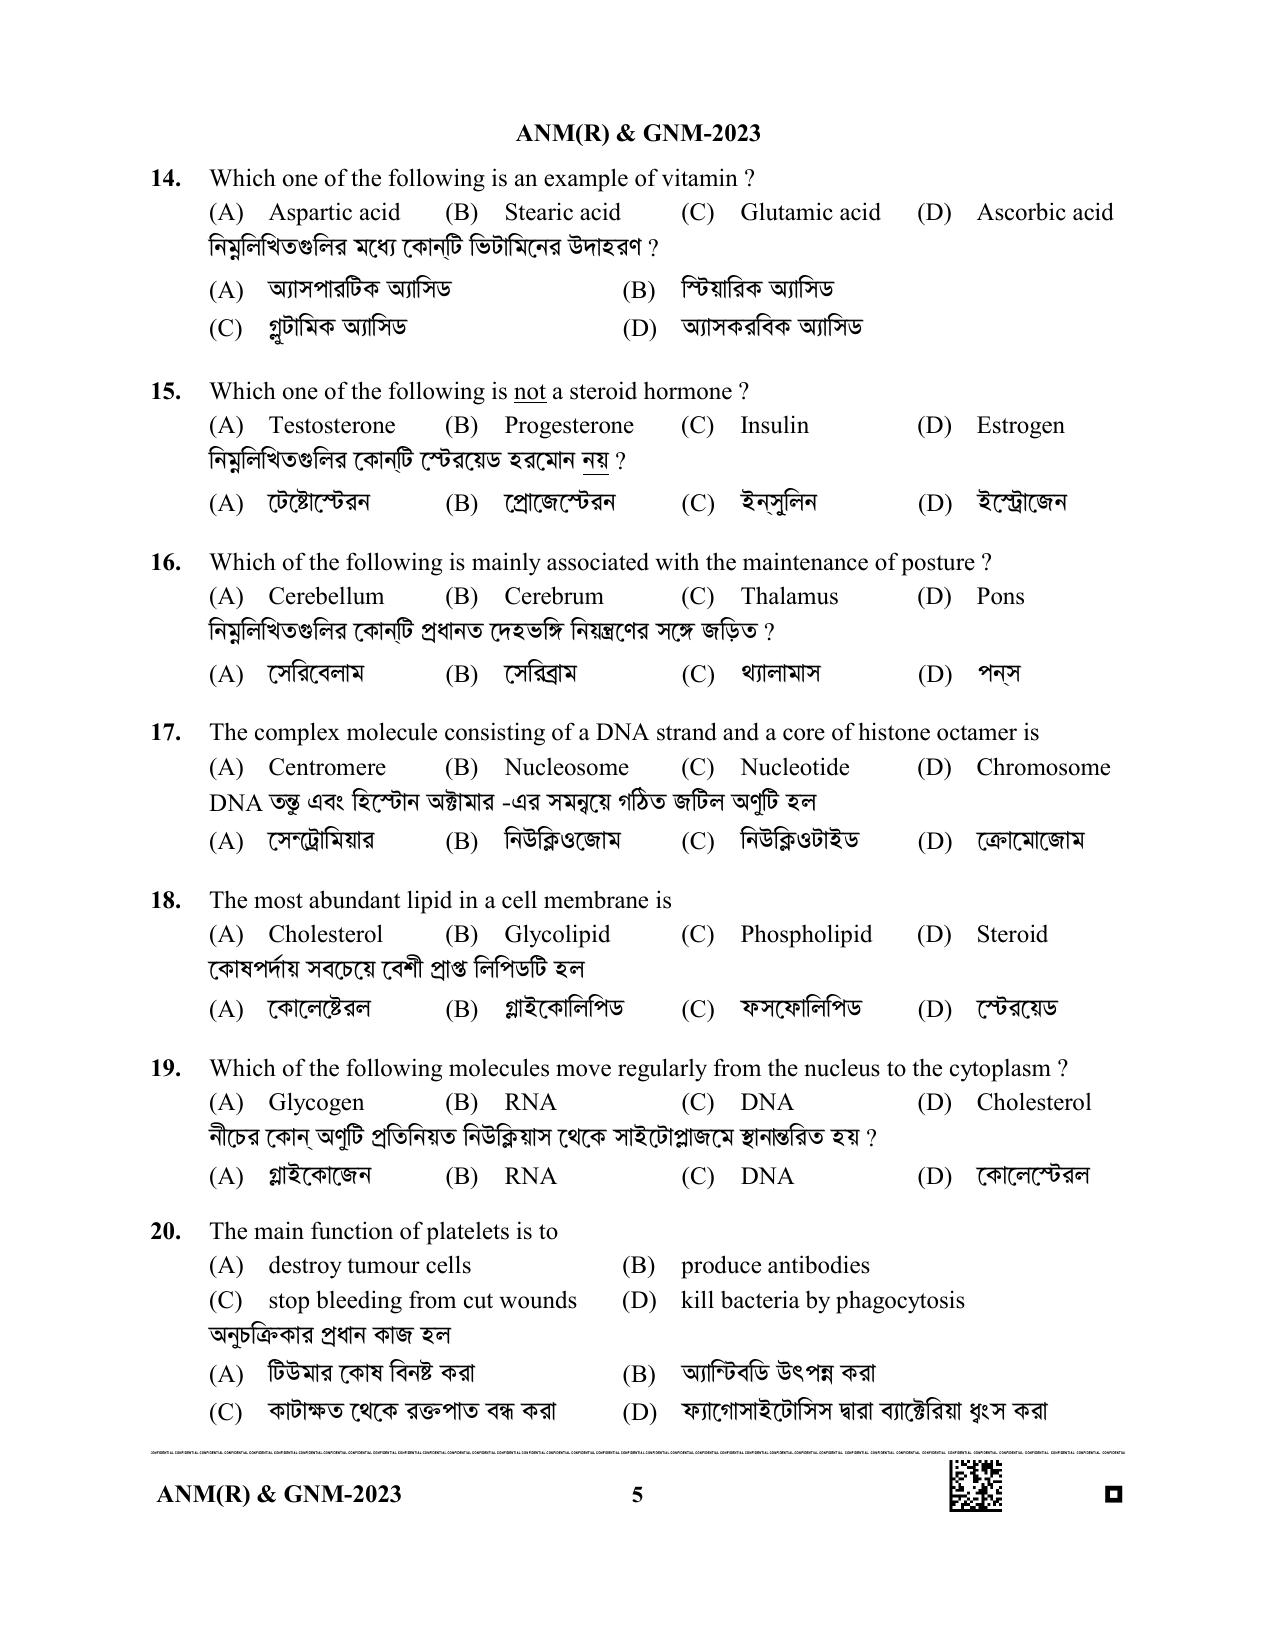 WB ANM GNM 2023 Question Paper - Page 5